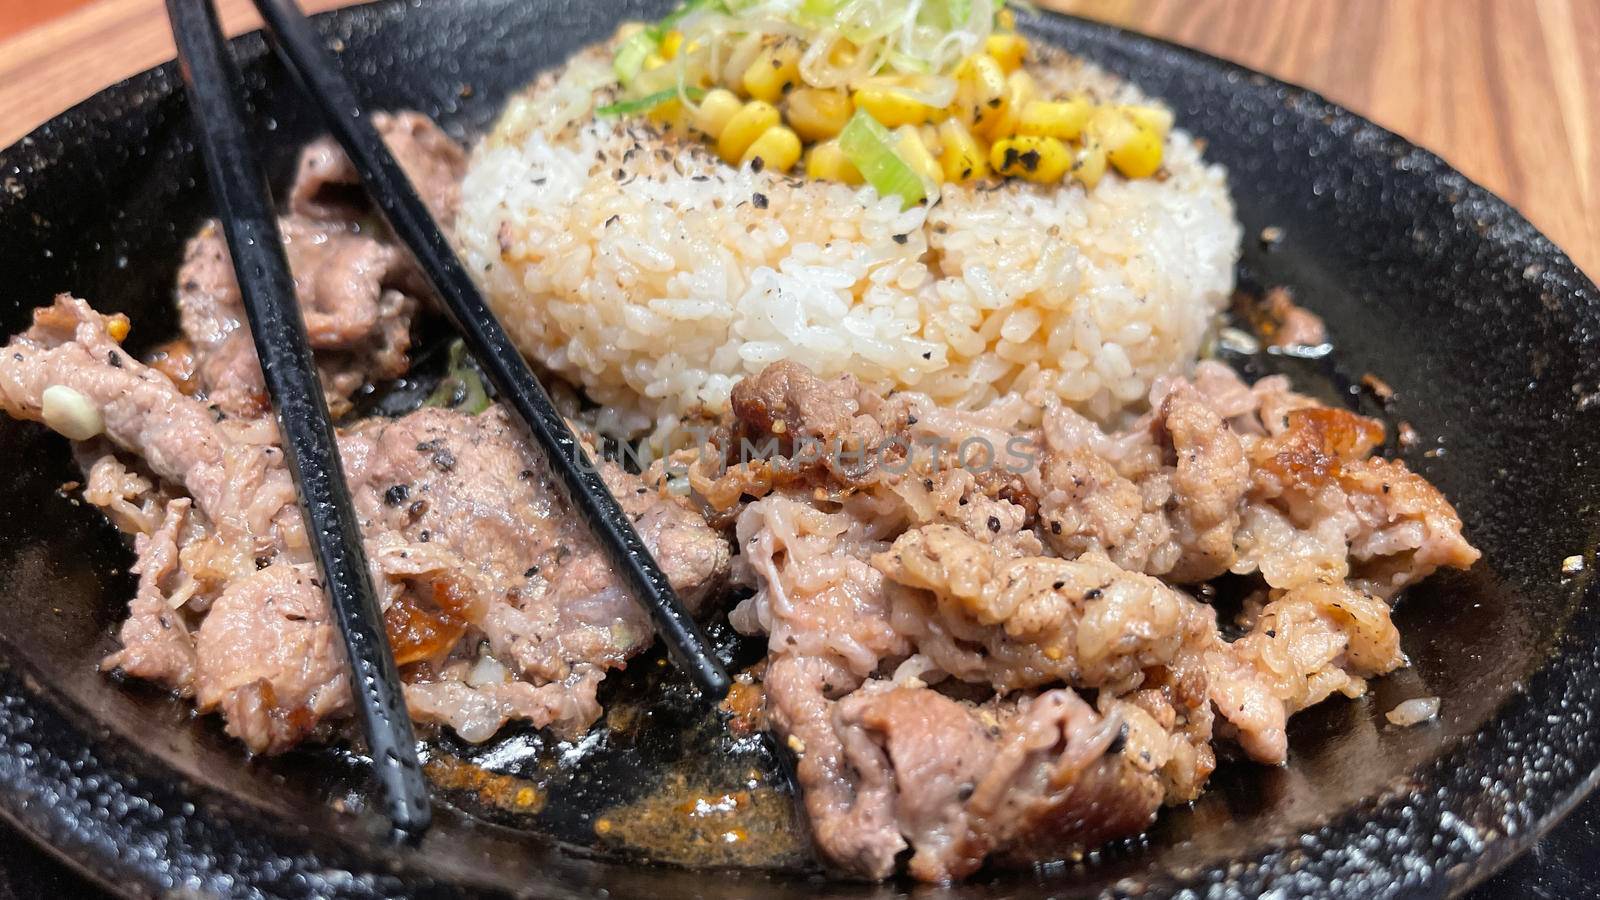 selective focus grilled beef steak with korean sauce bulgogi on top of rice with slice of pepper and sweet corn - korean and japanese food style in a restaurant